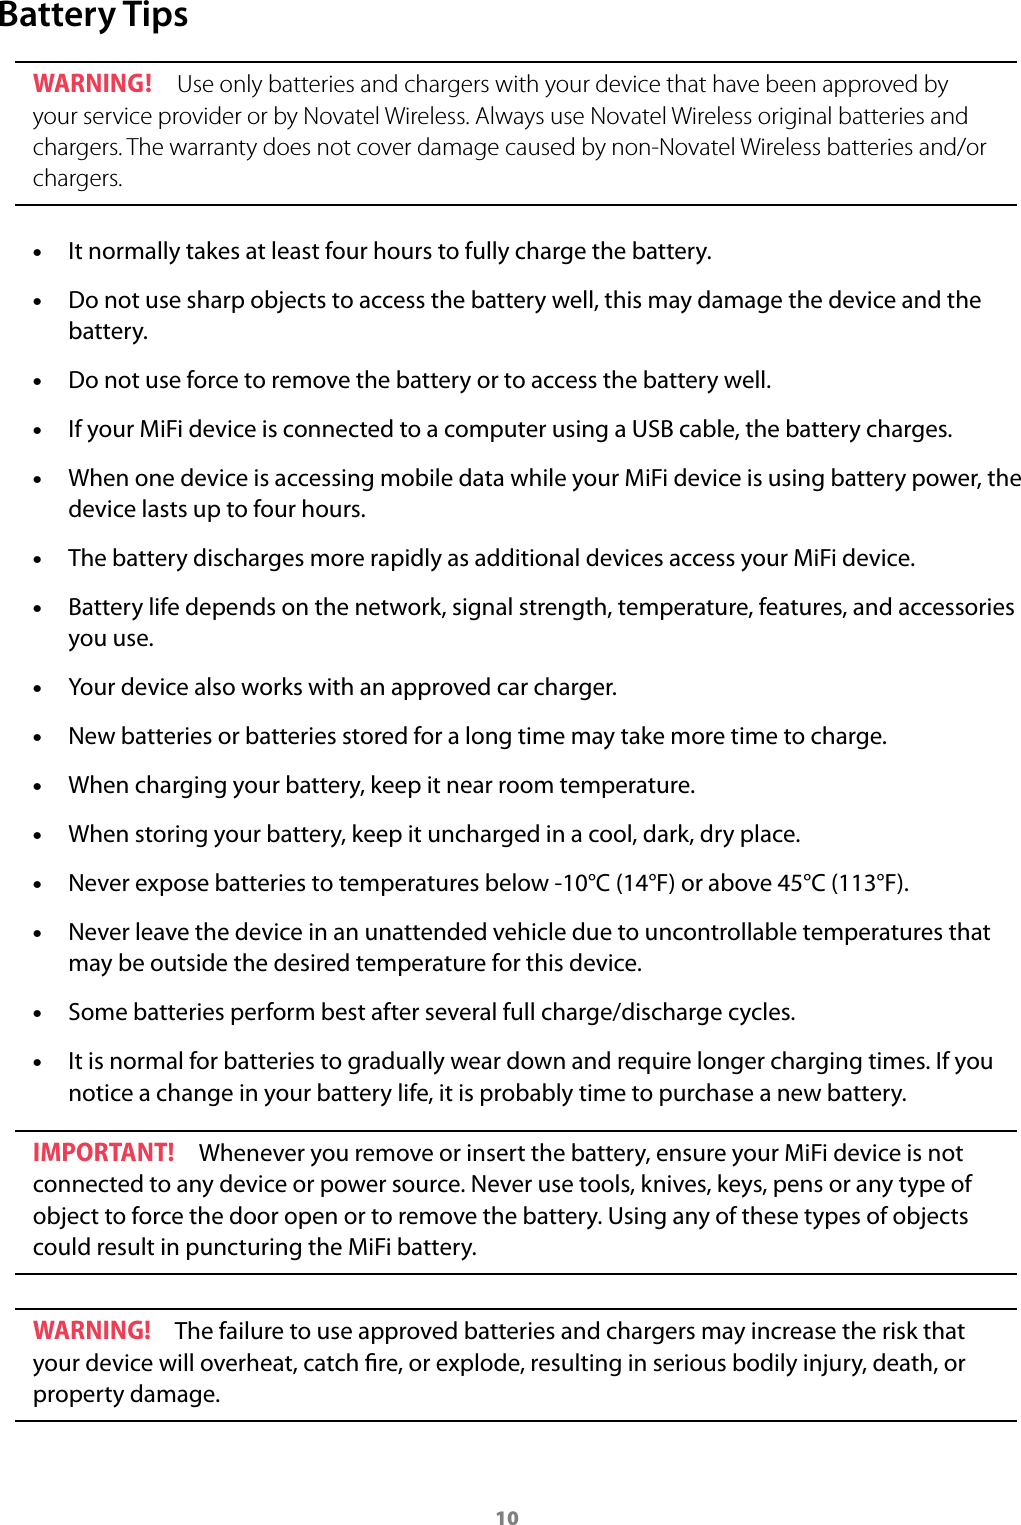 10Battery TipsWARNING !  Use only batteries and chargers with your device that have been approved by your service provider or by Novatel Wireless. Always use Novatel Wireless original batteries and chargers. The warranty does not cover damage caused by non-Novatel Wireless batteries and/or chargers. • It normally takes at least four hours to fully charge the battery.  • Do not use sharp objects to access the battery well, this may damage the device and the battery.  • Do not use force to remove the battery or to access the battery well.  • If your MiFi device is connected to a computer using a USB cable, the battery charges.  • When one device is accessing mobile data while your MiFi device is using battery power, the device lasts up to four hours.  • The battery discharges more rapidly as additional devices access your MiFi device.  • Battery life depends on the network, signal strength, temperature, features, and accessories you use.  • Your device also works with an approved car charger.  • New batteries or batteries stored for a long time may take more time to charge.  • When charging your battery, keep it near room temperature.  • When storing your battery, keep it uncharged in a cool, dark, dry place.  • Never expose batteries to temperatures below -10°C (14°F) or above 45°C (113°F).  • Never leave the device in an unattended vehicle due to uncontrollable temperatures that may be outside the desired temperature for this device.  • Some batteries perform best after several full charge/discharge cycles.  • It is normal for batteries to gradually wear down and require longer charging times. If you notice a change in your battery life, it is probably time to purchase a new battery.IMPORTANT!  Whenever you remove or insert the battery, ensure your MiFi device is not connected to any device or power source. Never use tools, knives, keys, pens or any type of object to force the door open or to remove the battery. Using any of these types of objects could result in puncturing the MiFi battery.WARNING!  The failure to use approved batteries and chargers may increase the risk that your device will overheat, catch re, or explode, resulting in serious bodily injury, death, or property damage.